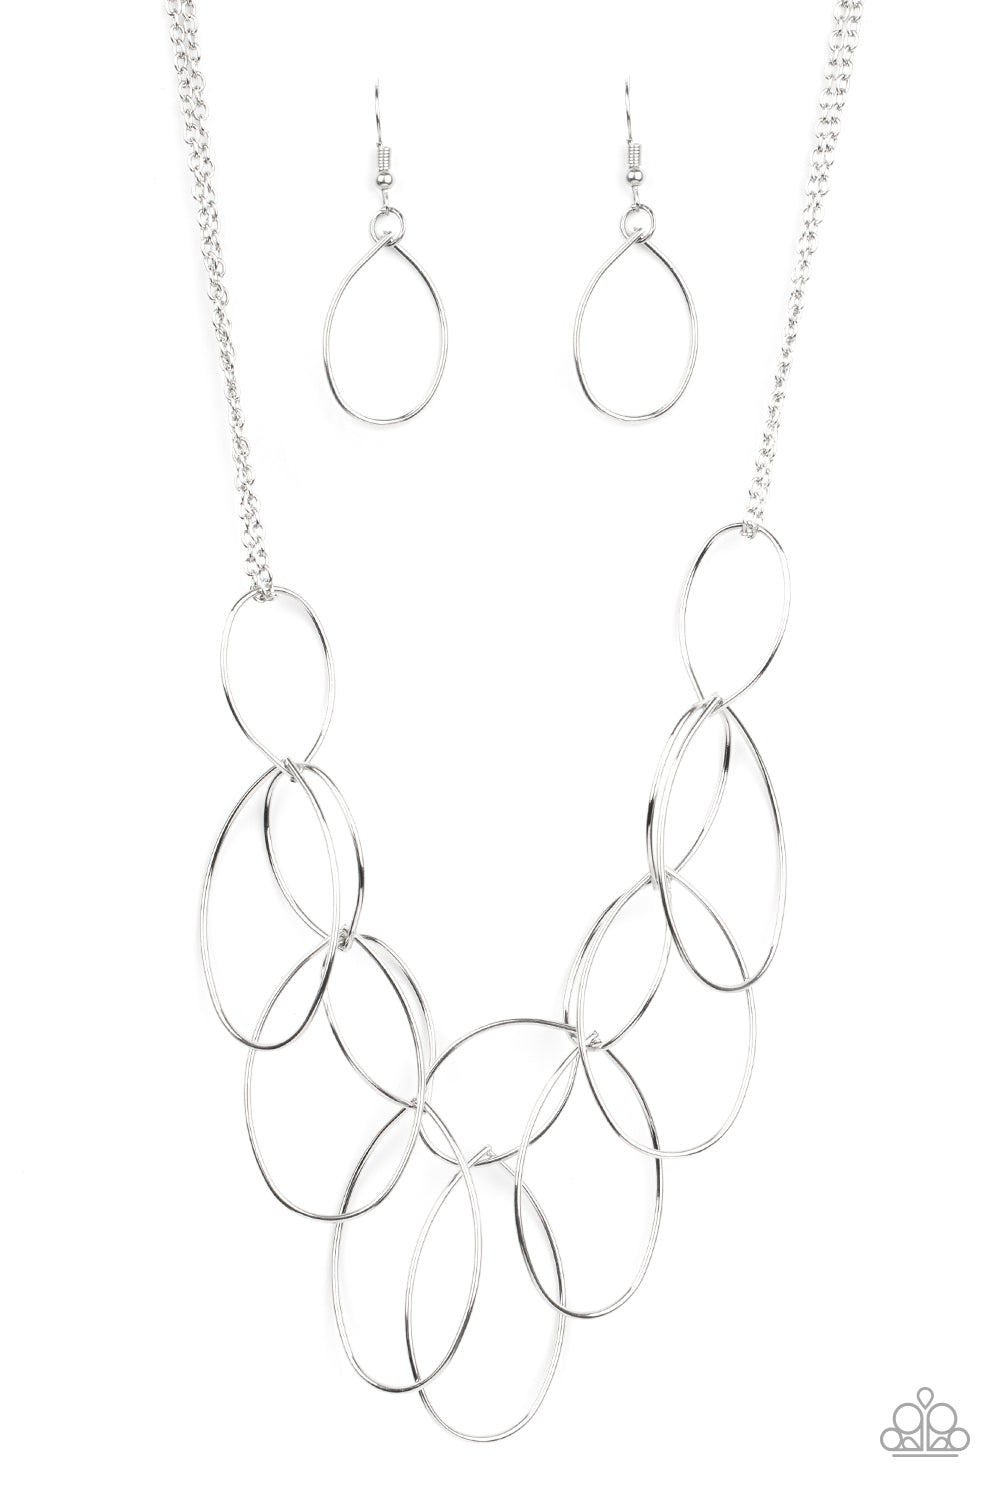 Top-TEAR Fashion Necklace - Silver